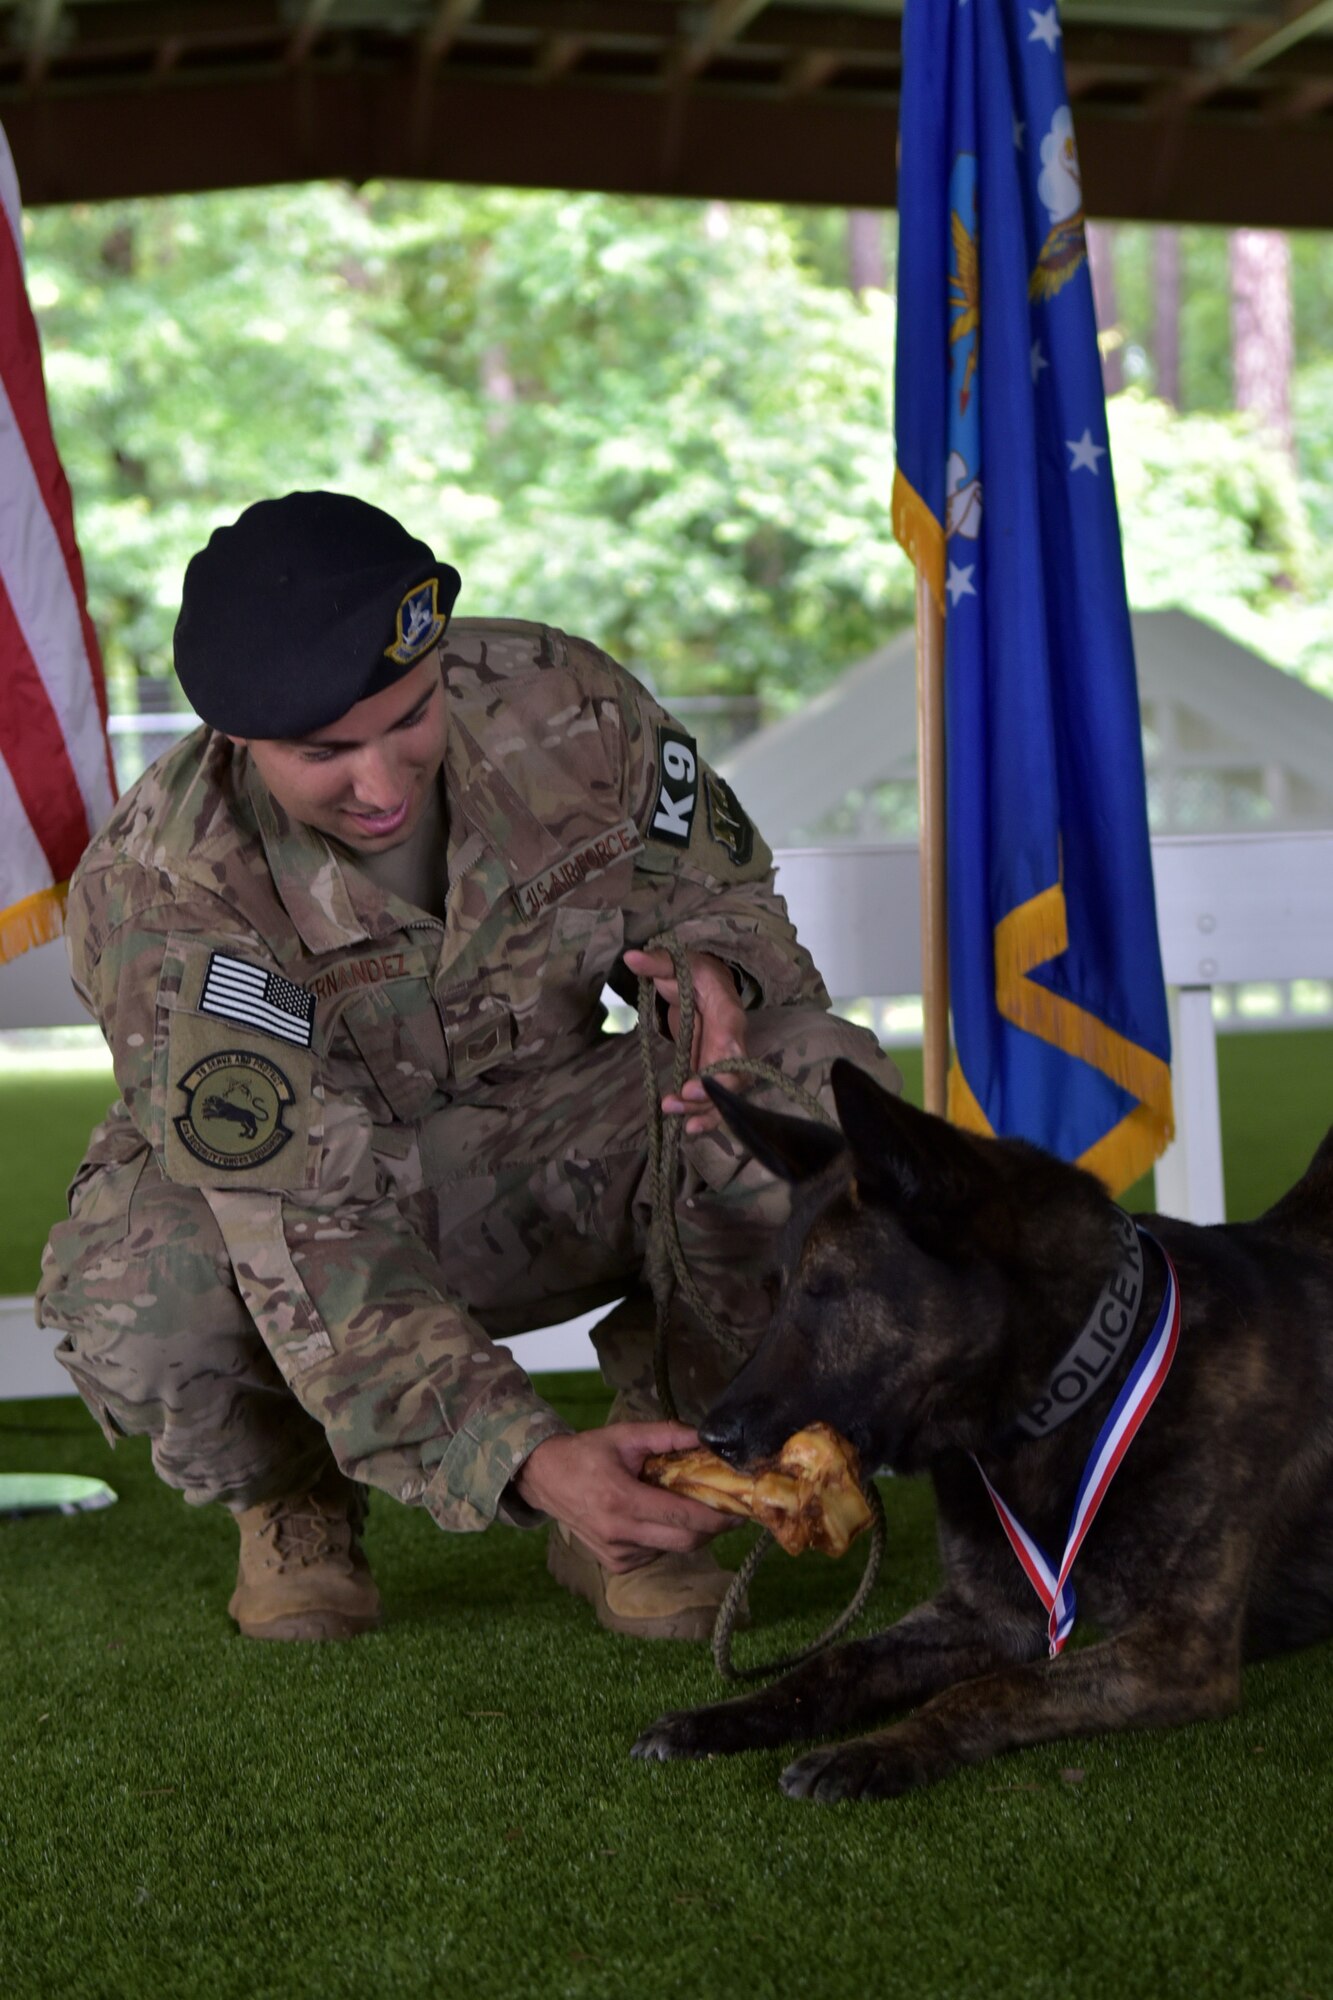 Tech. Sgt. Sergio Hernandez, 4th SFS kennel master, presents Military Working Dog Ronni P835 with a ceremonial bone during MWD Ronni’s retirement ceremony on June 11, 2019 at Seymour Johnson Air Force Base, North Carolina.